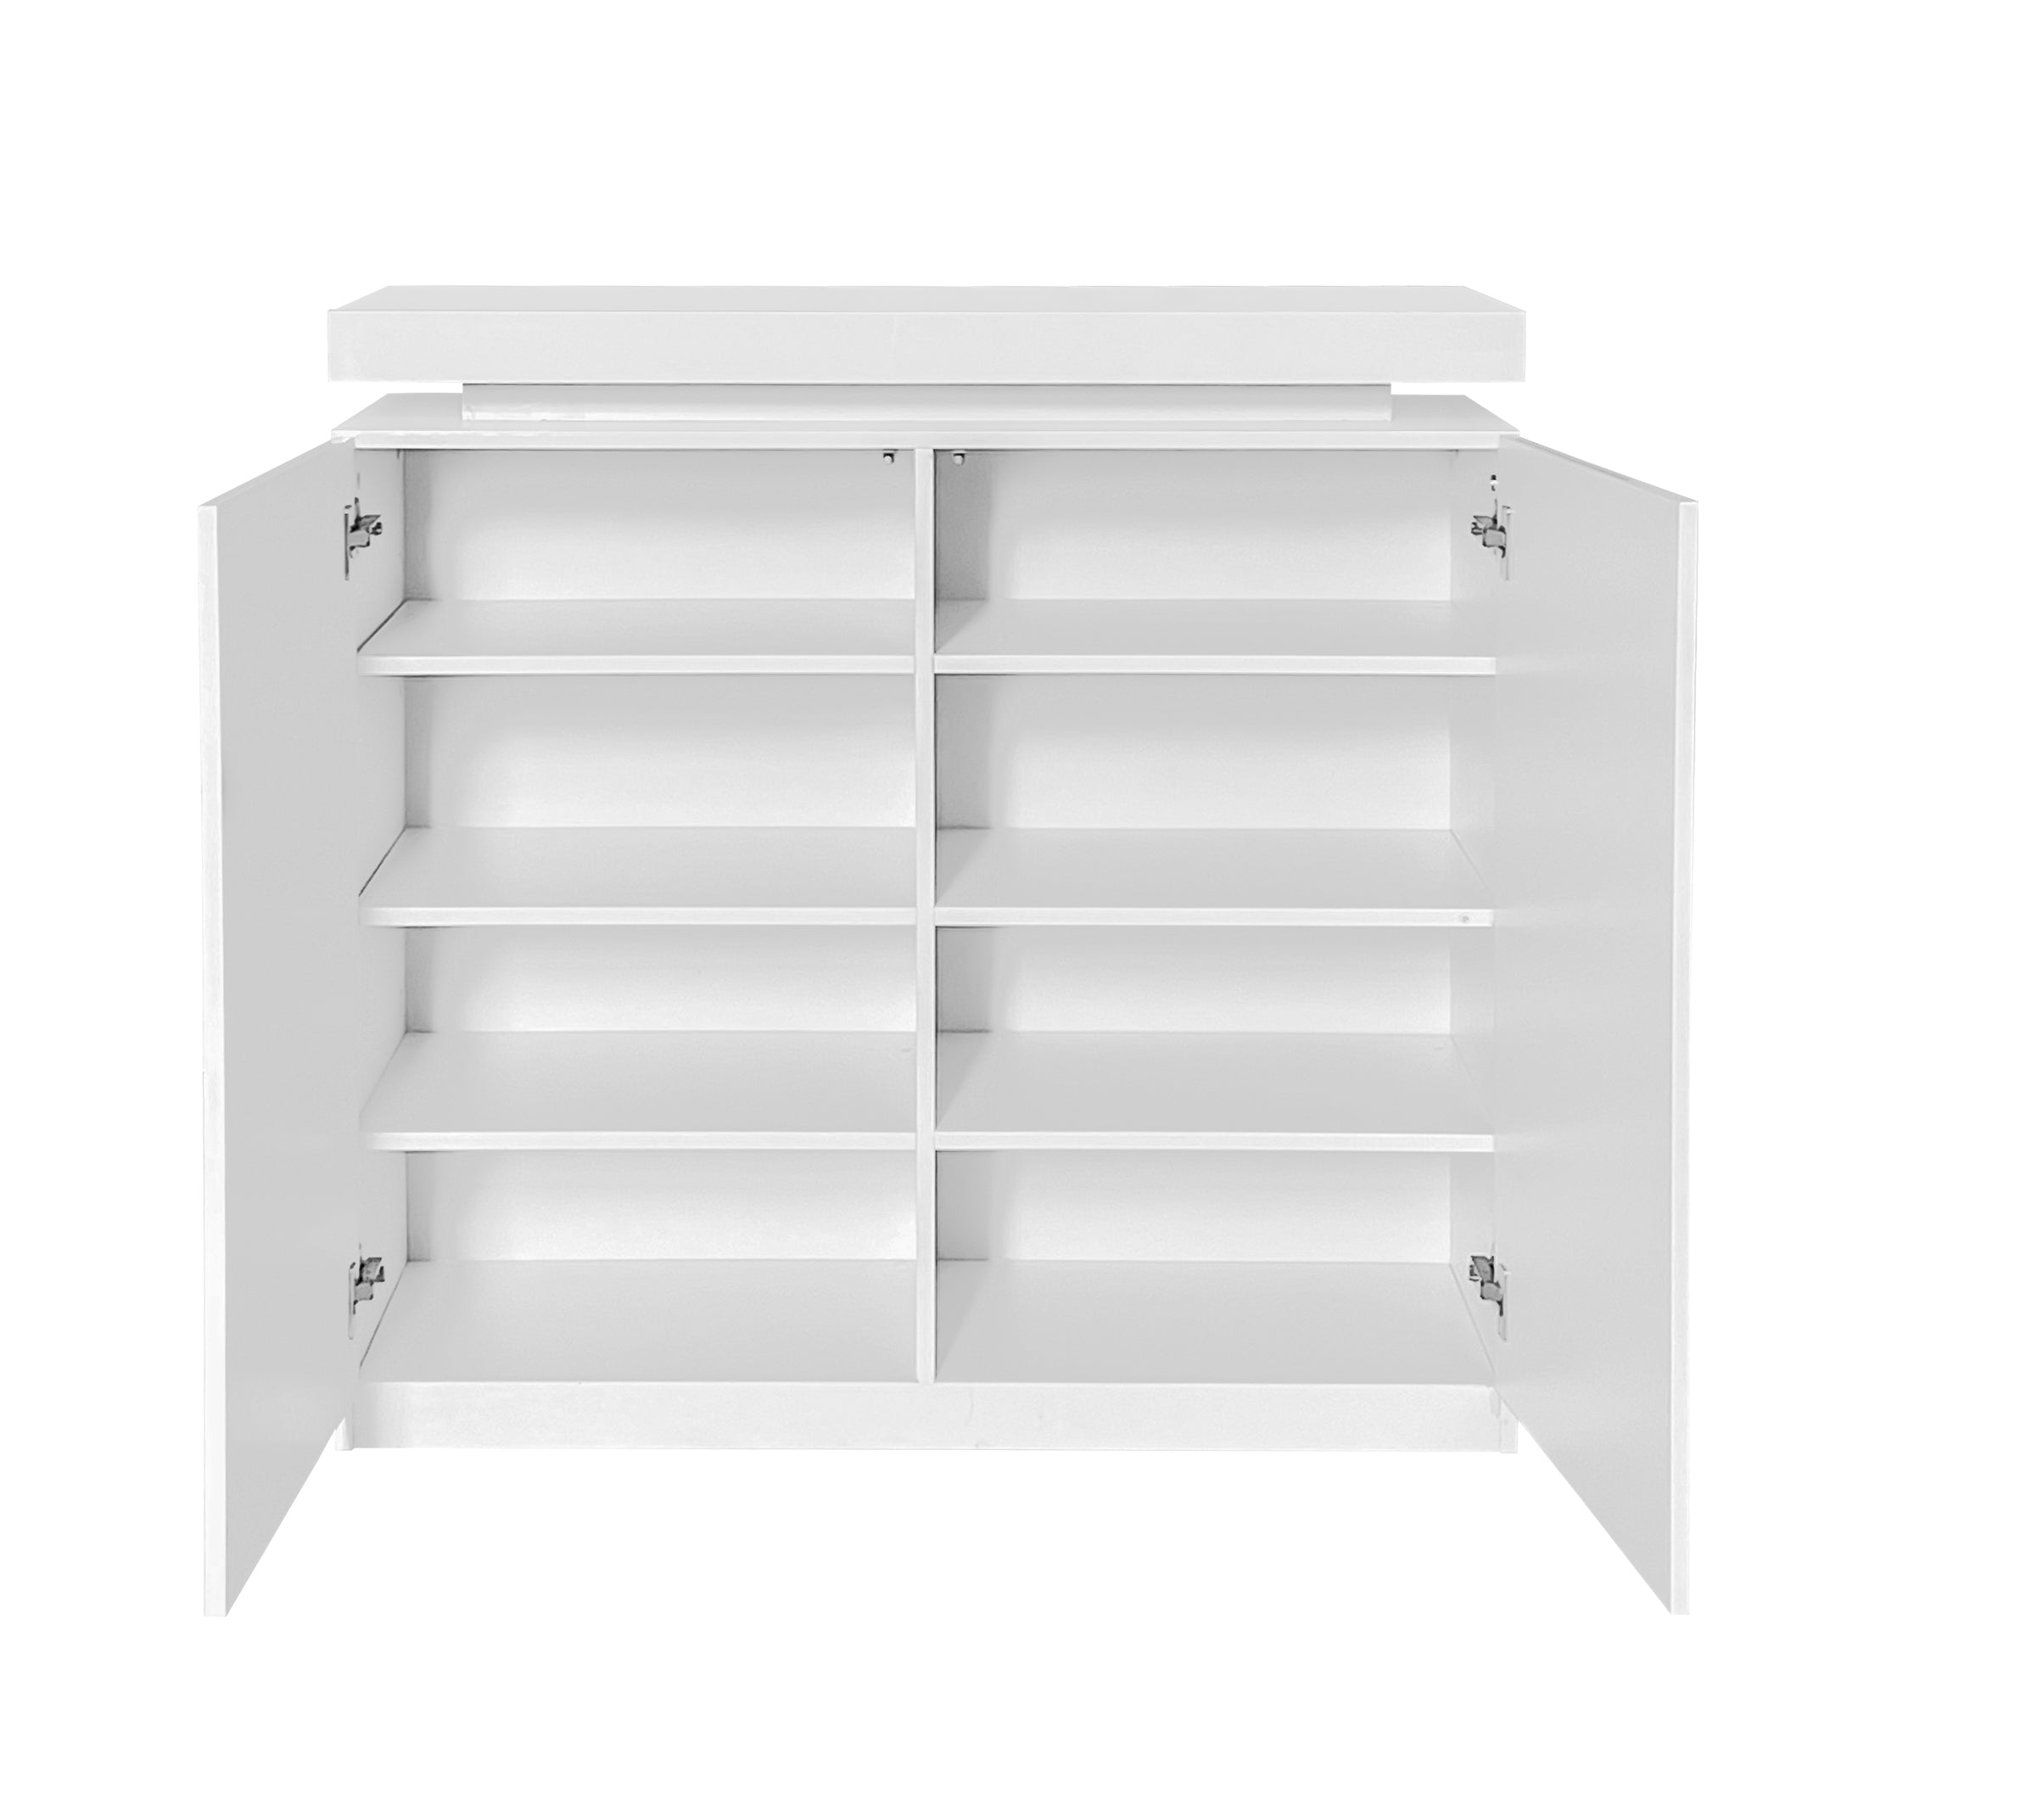 🆓🚛 Large Spaces Shoe Cabinet High Glossy White Color With Led Light, Adjustable Shelves, White